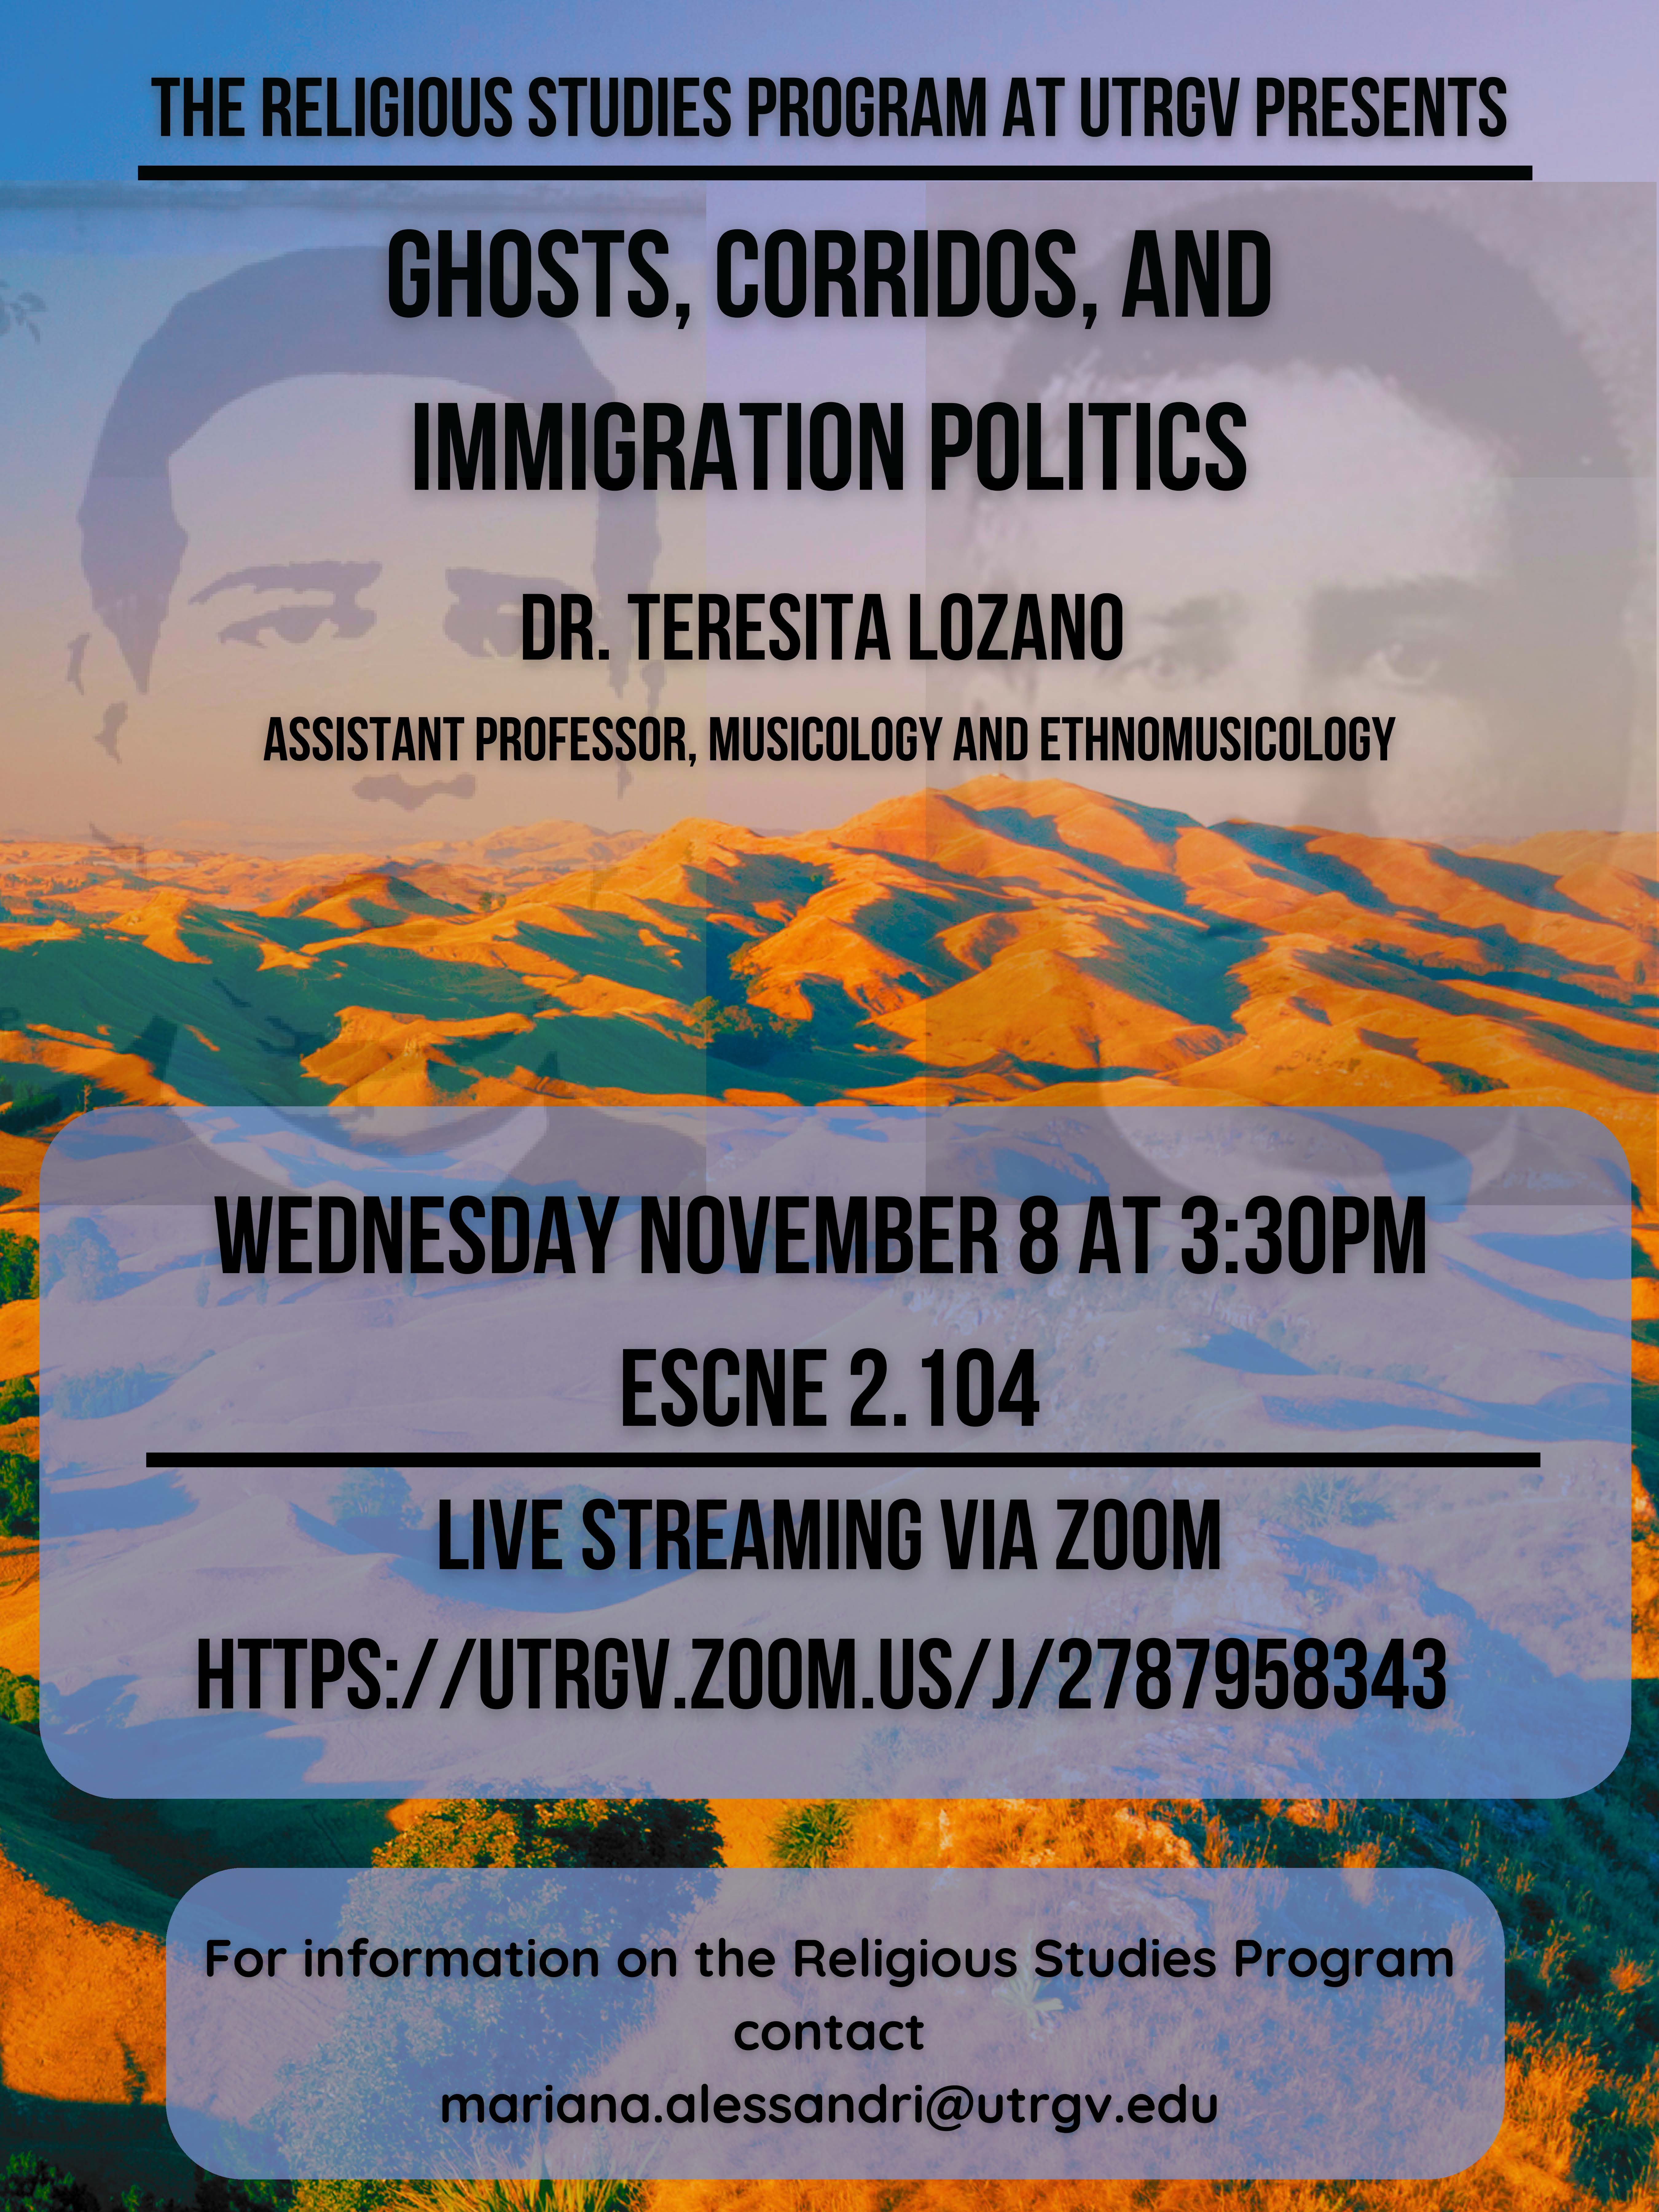 The Religious Studies program presents a hybrid talk by Dr. Teresita Lozano on Wed., Nov. 8th, at 3:30 pm! 